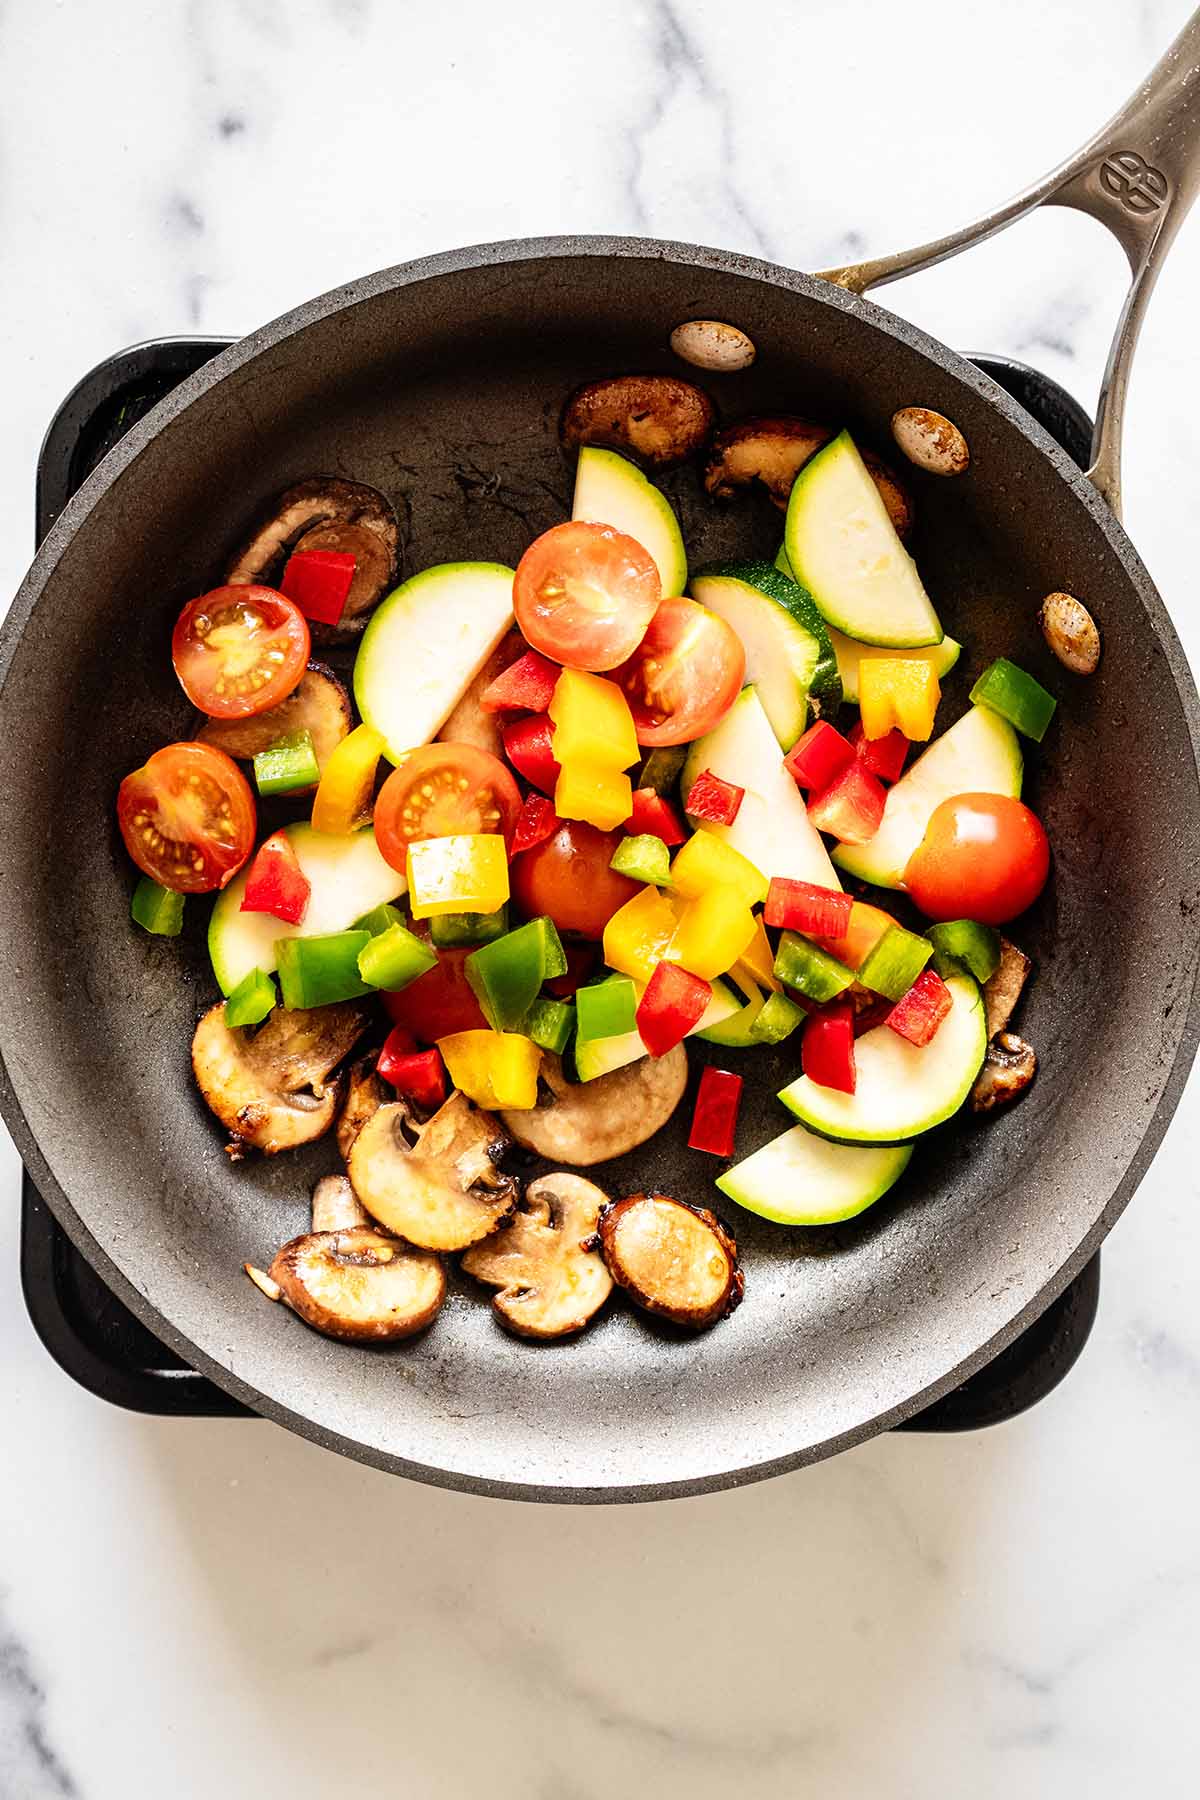 Chopped vegetables cooking in a skillet